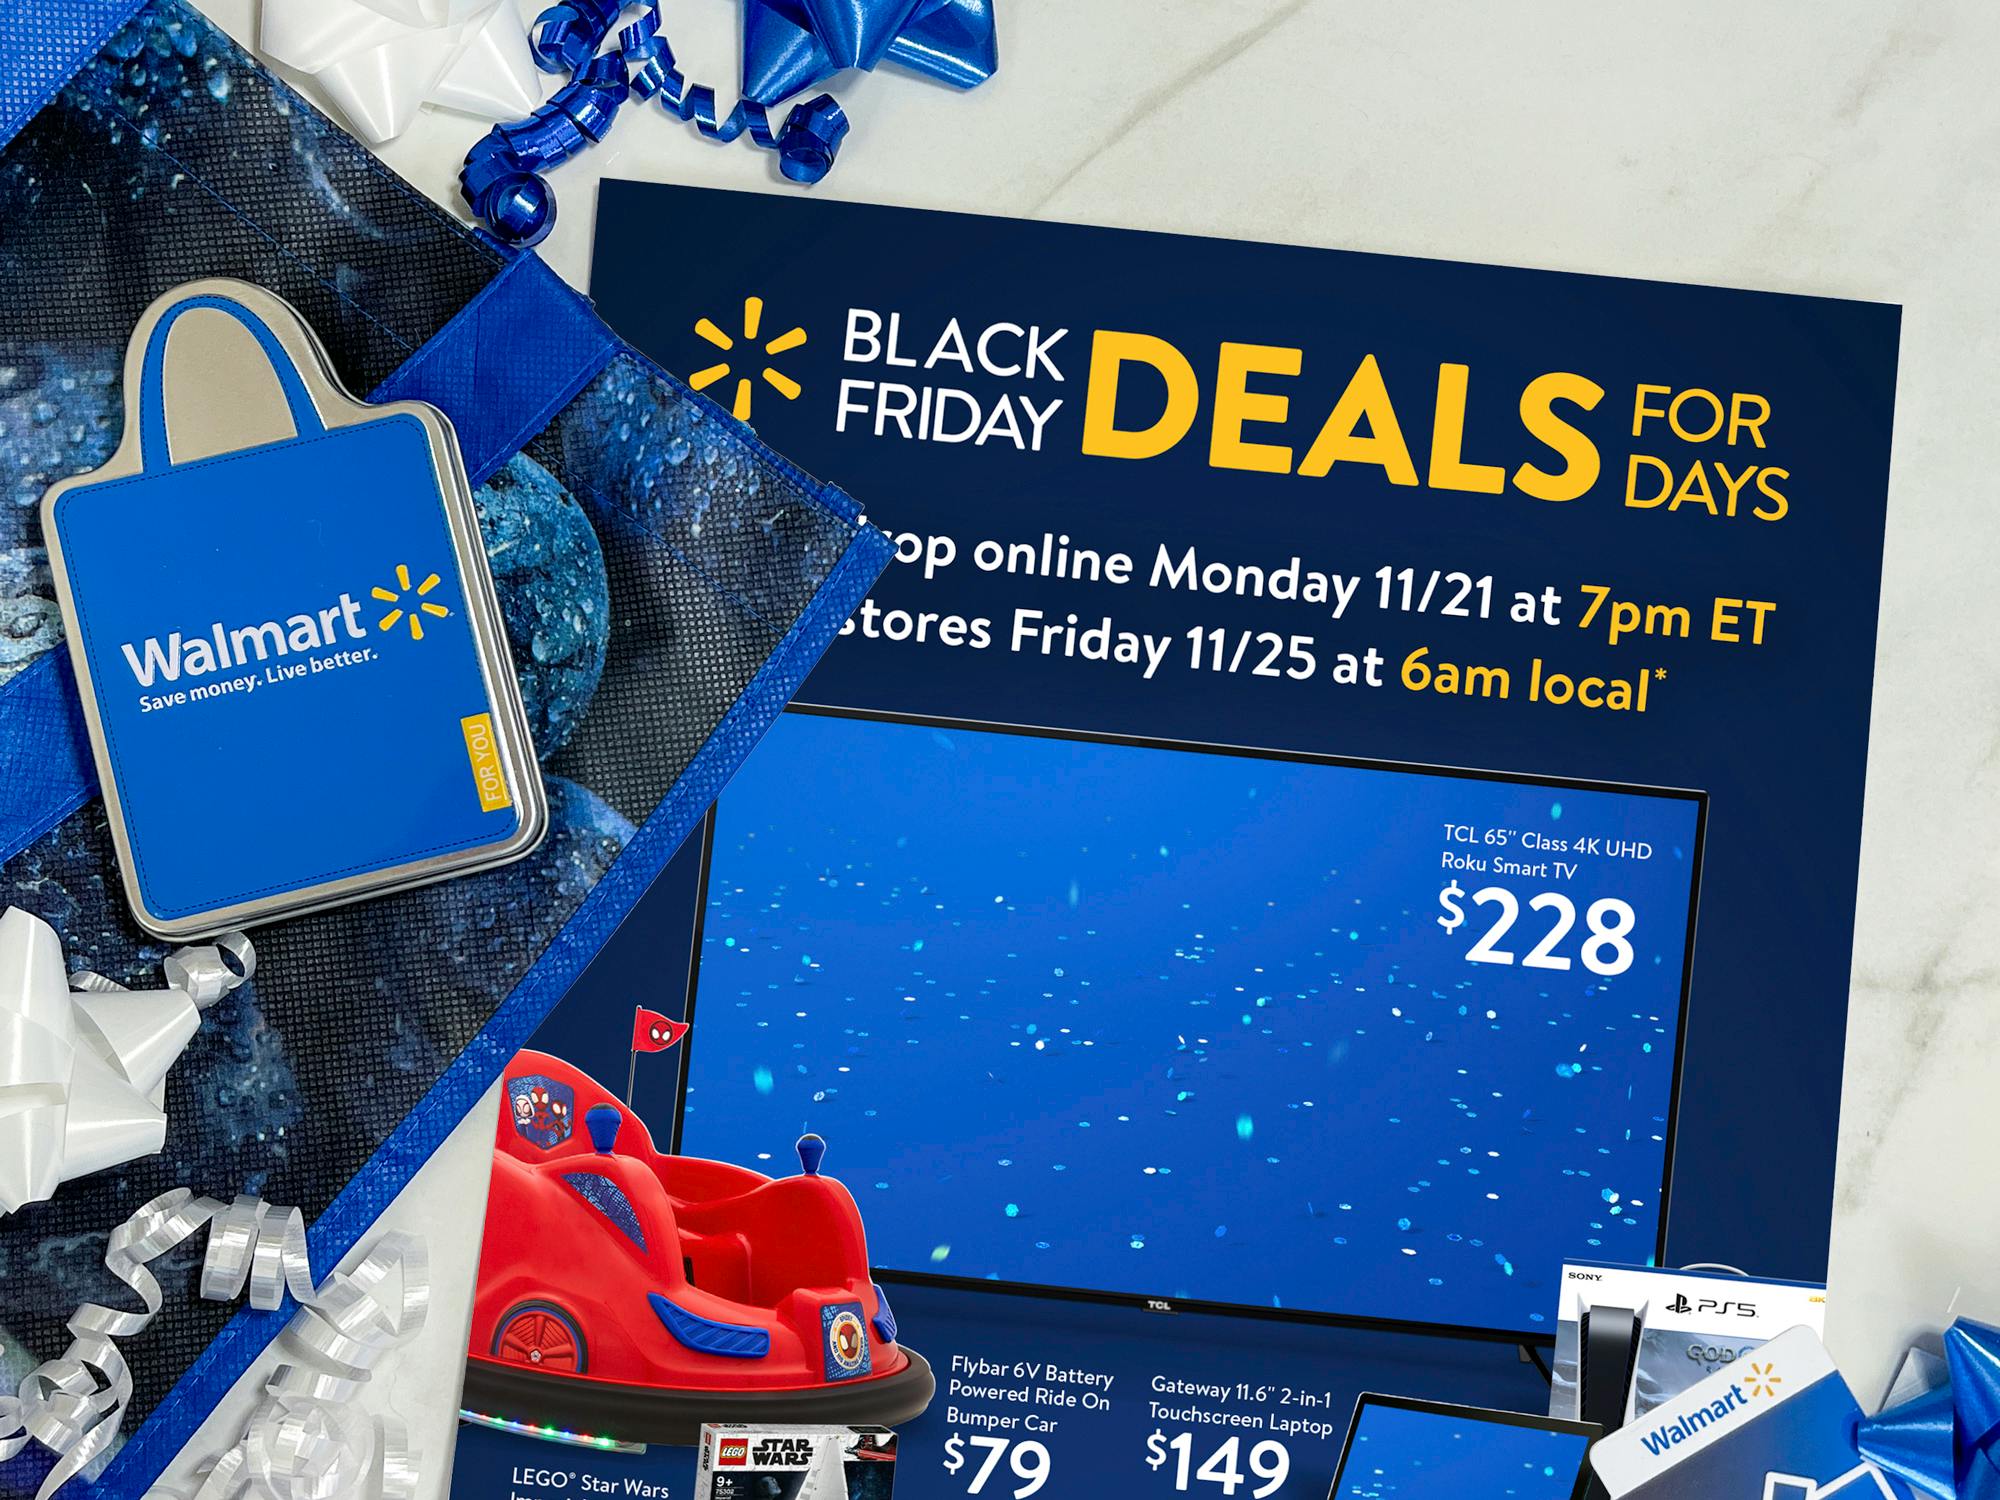 Walmart Deals for Days: The best Black Friday video gaming deals